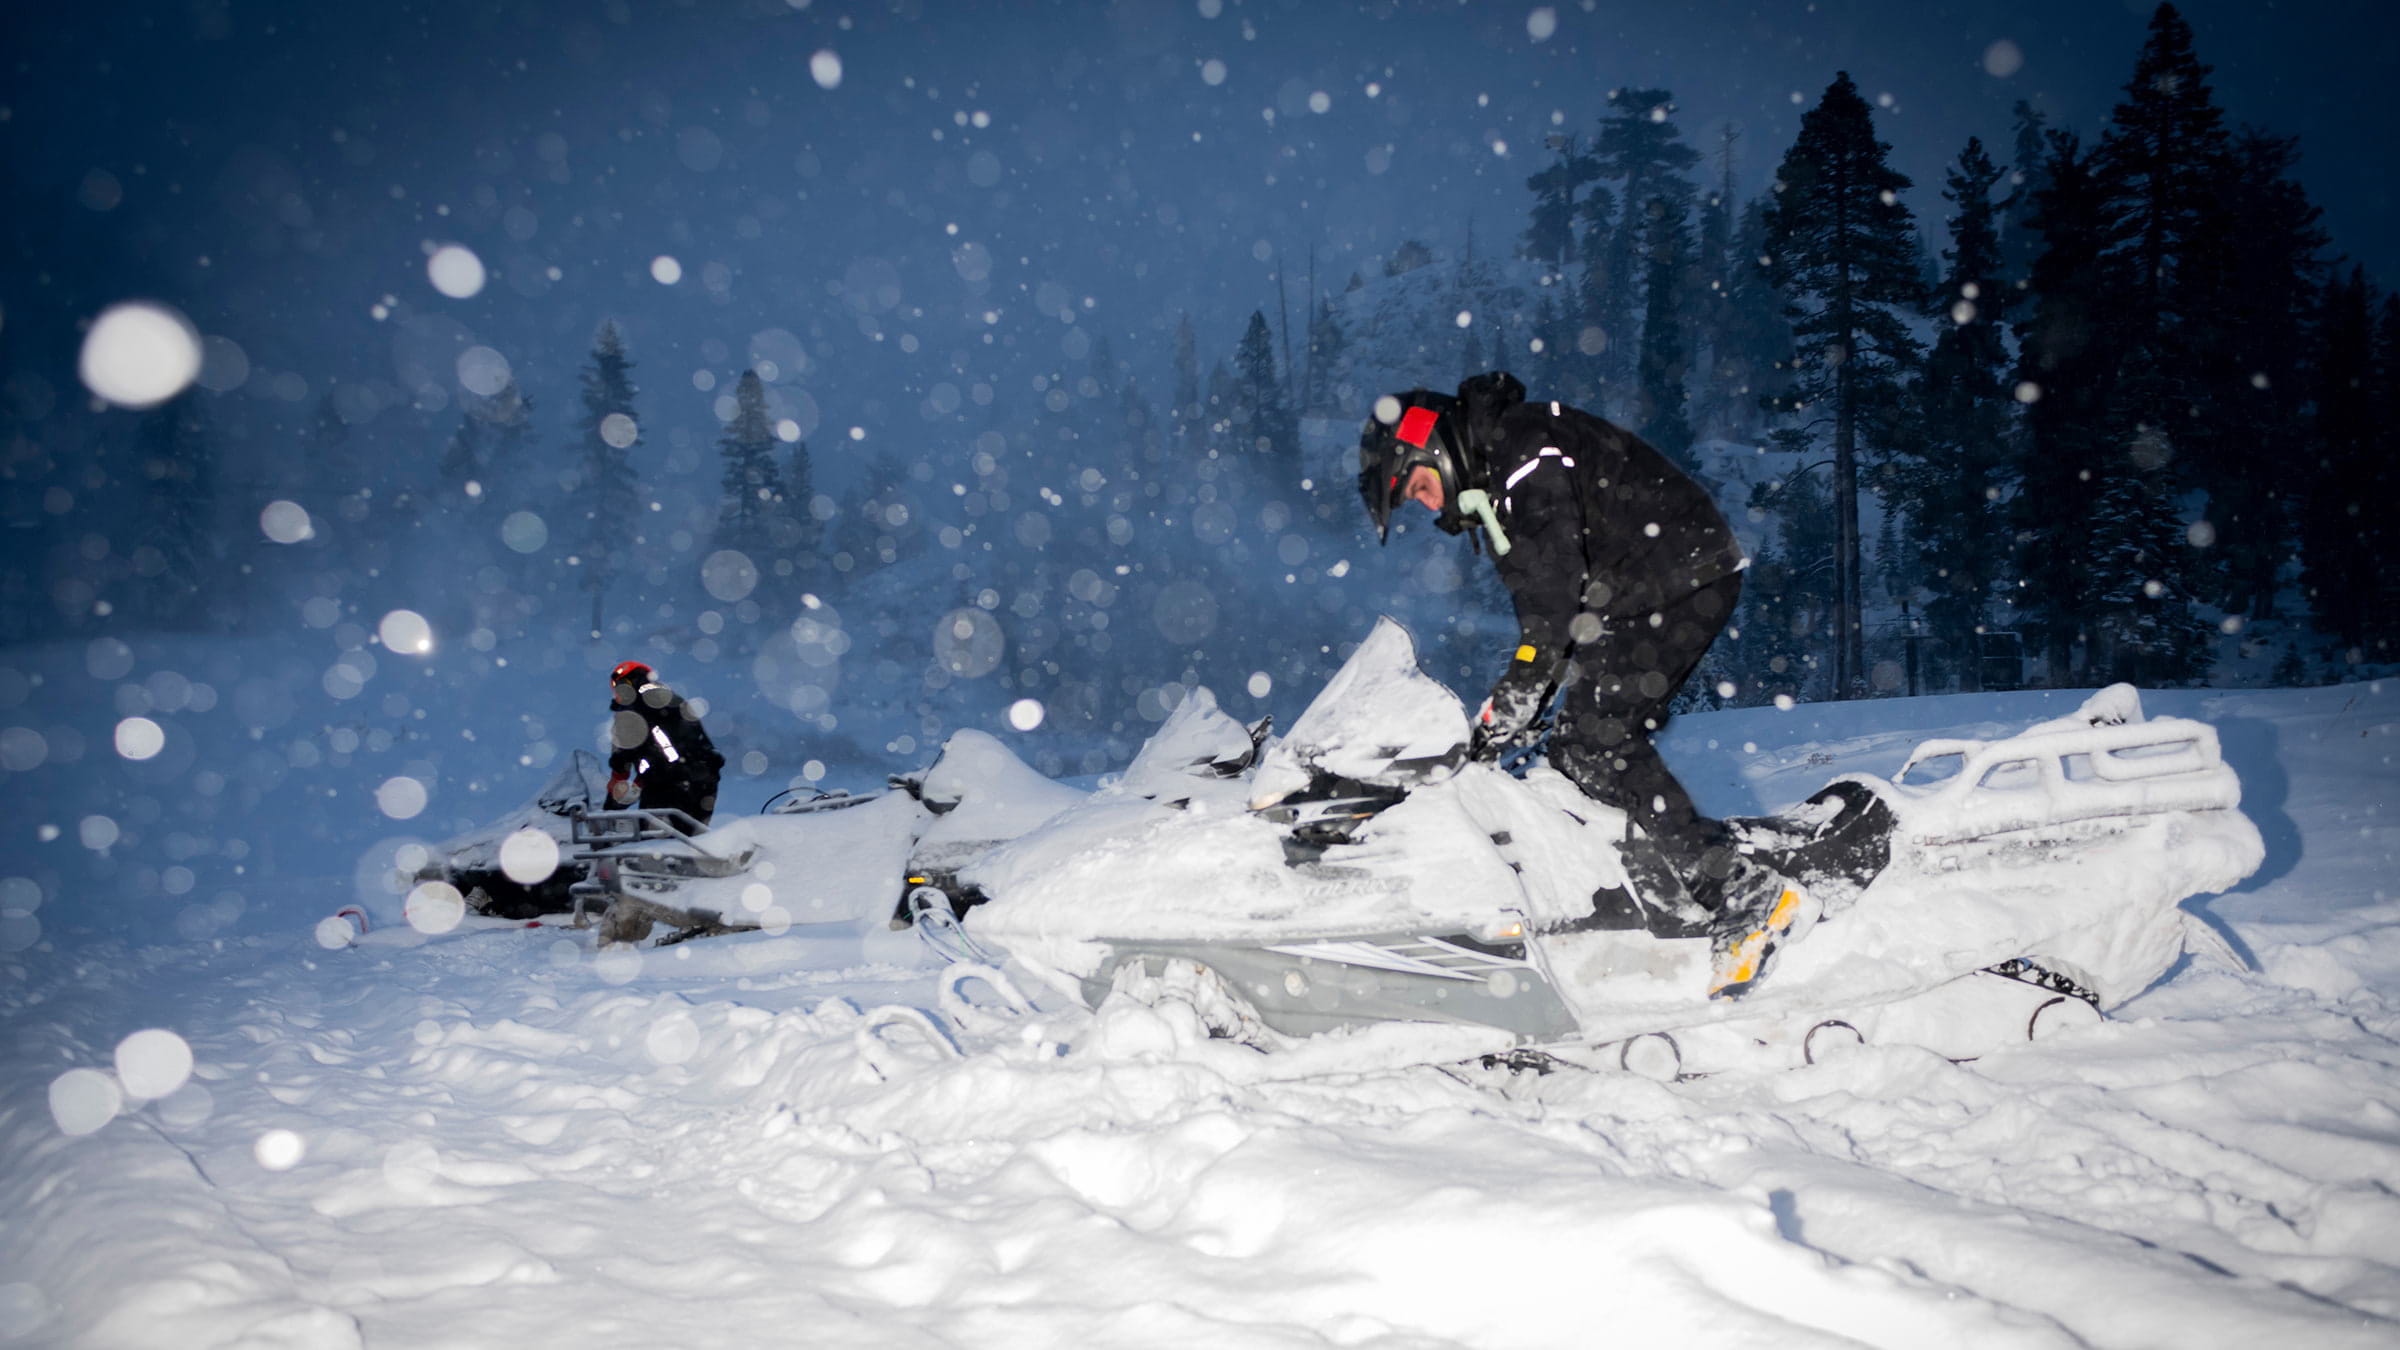 First storm of the season at Alpine Meadows on November 8, 2020